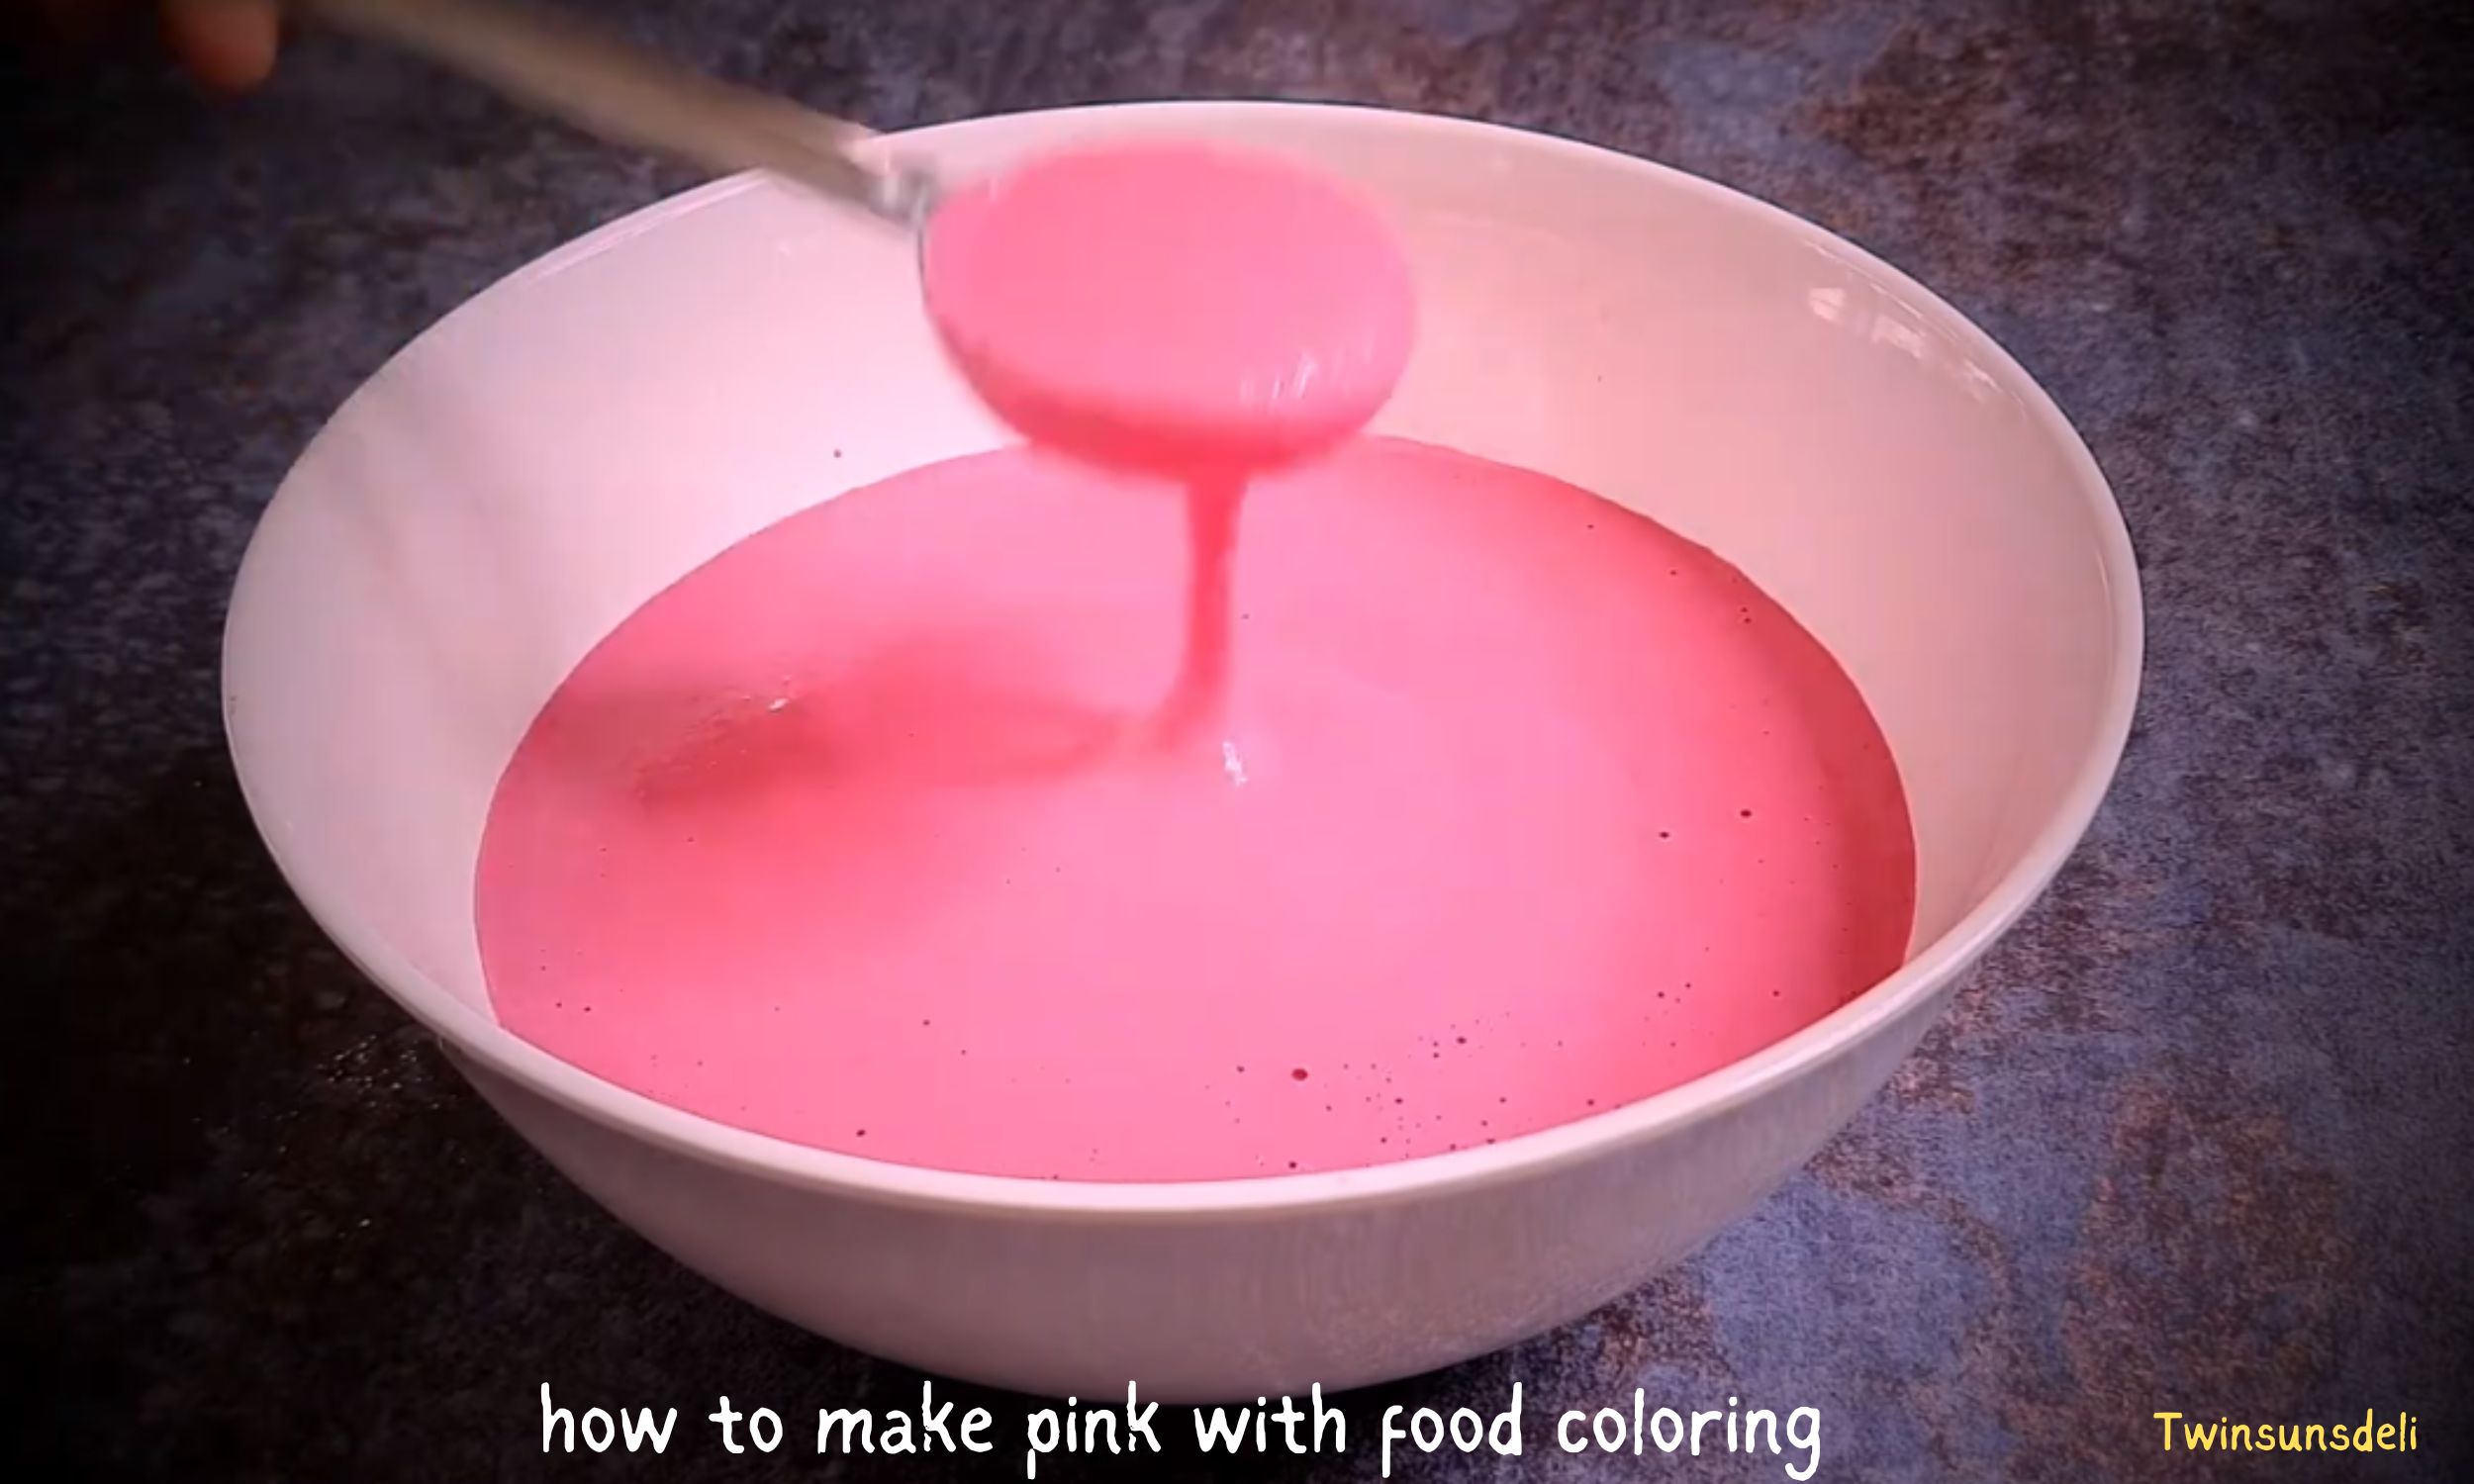 How to make pink with food coloring